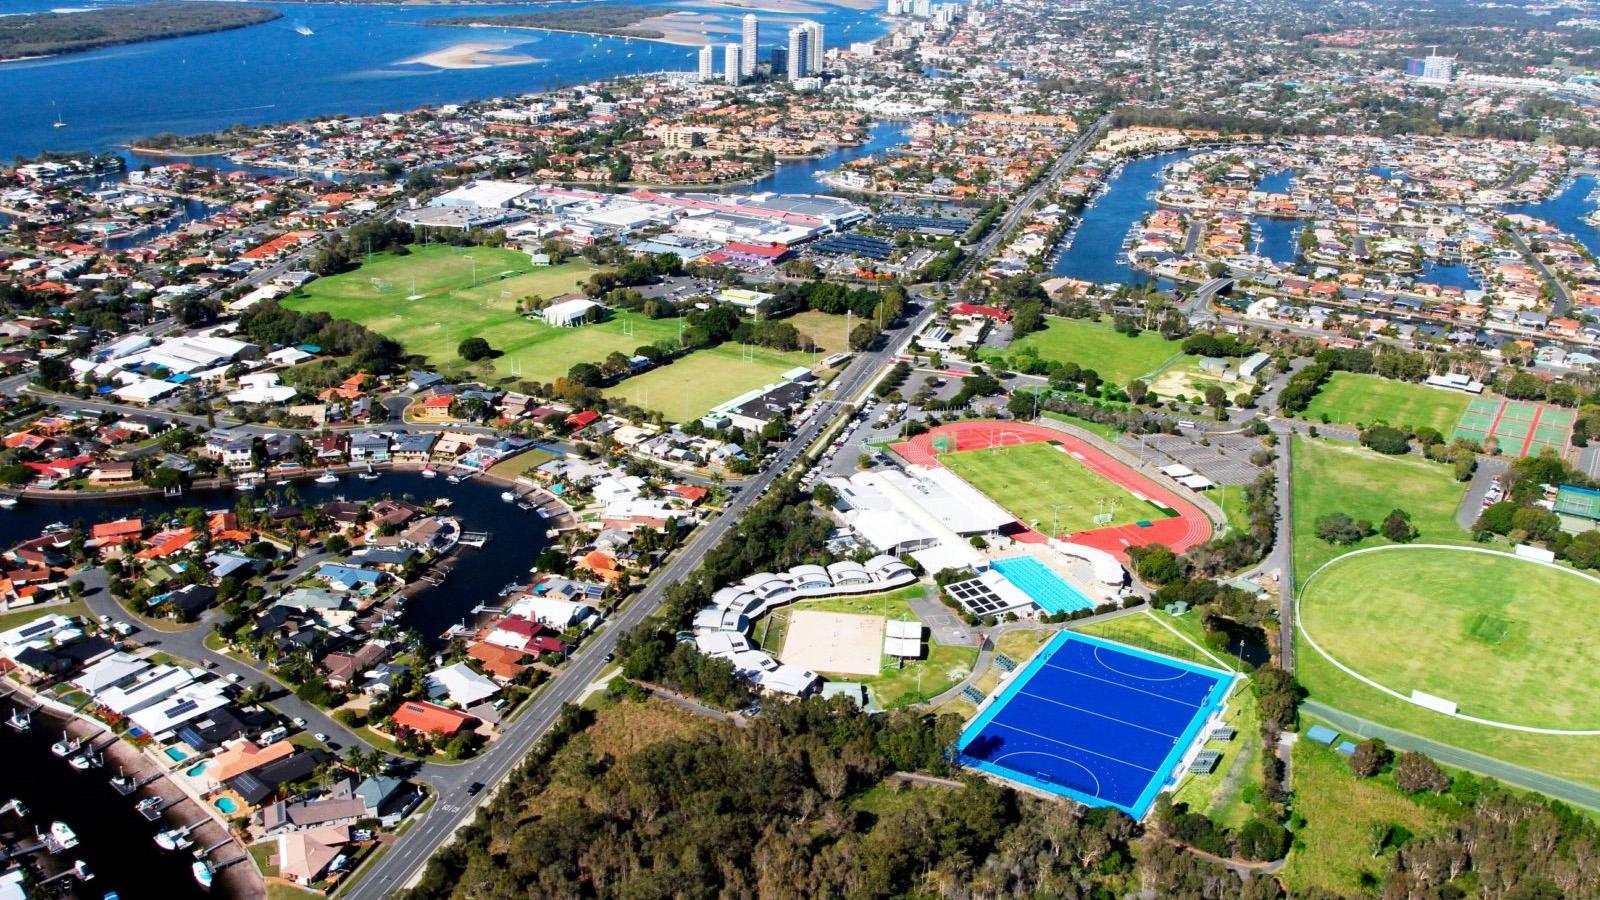 Aerial view of sports facilities with city in background